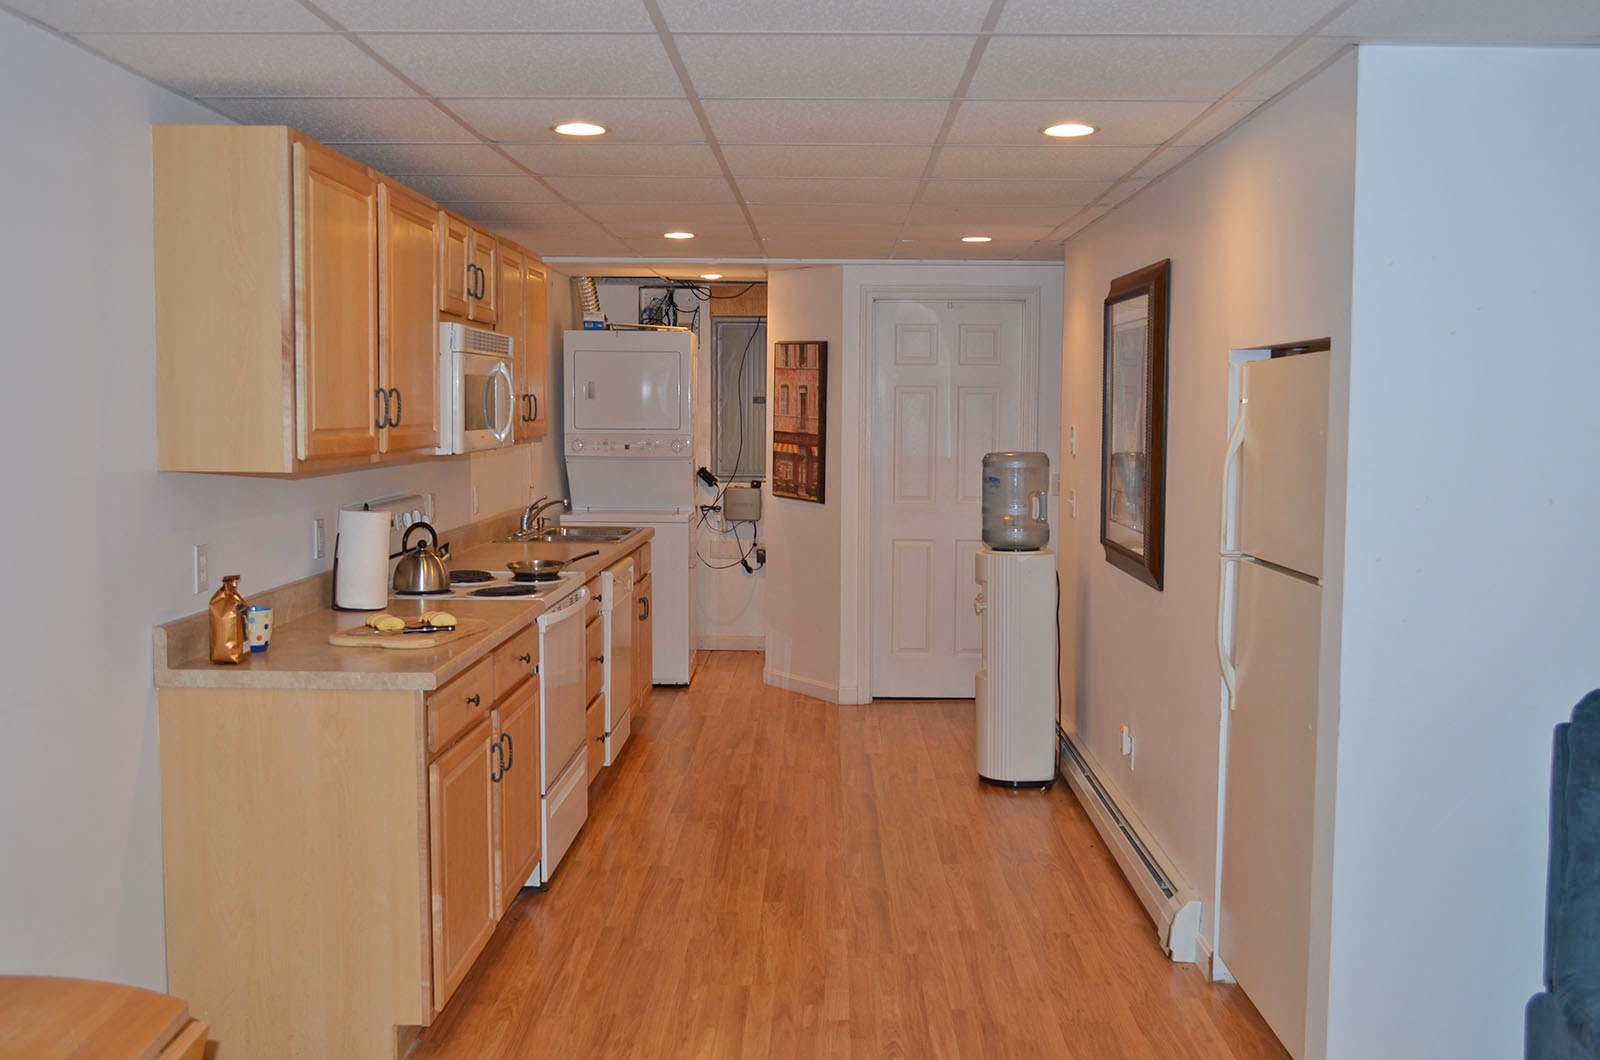 The kitchen is equipped with modern appliances.